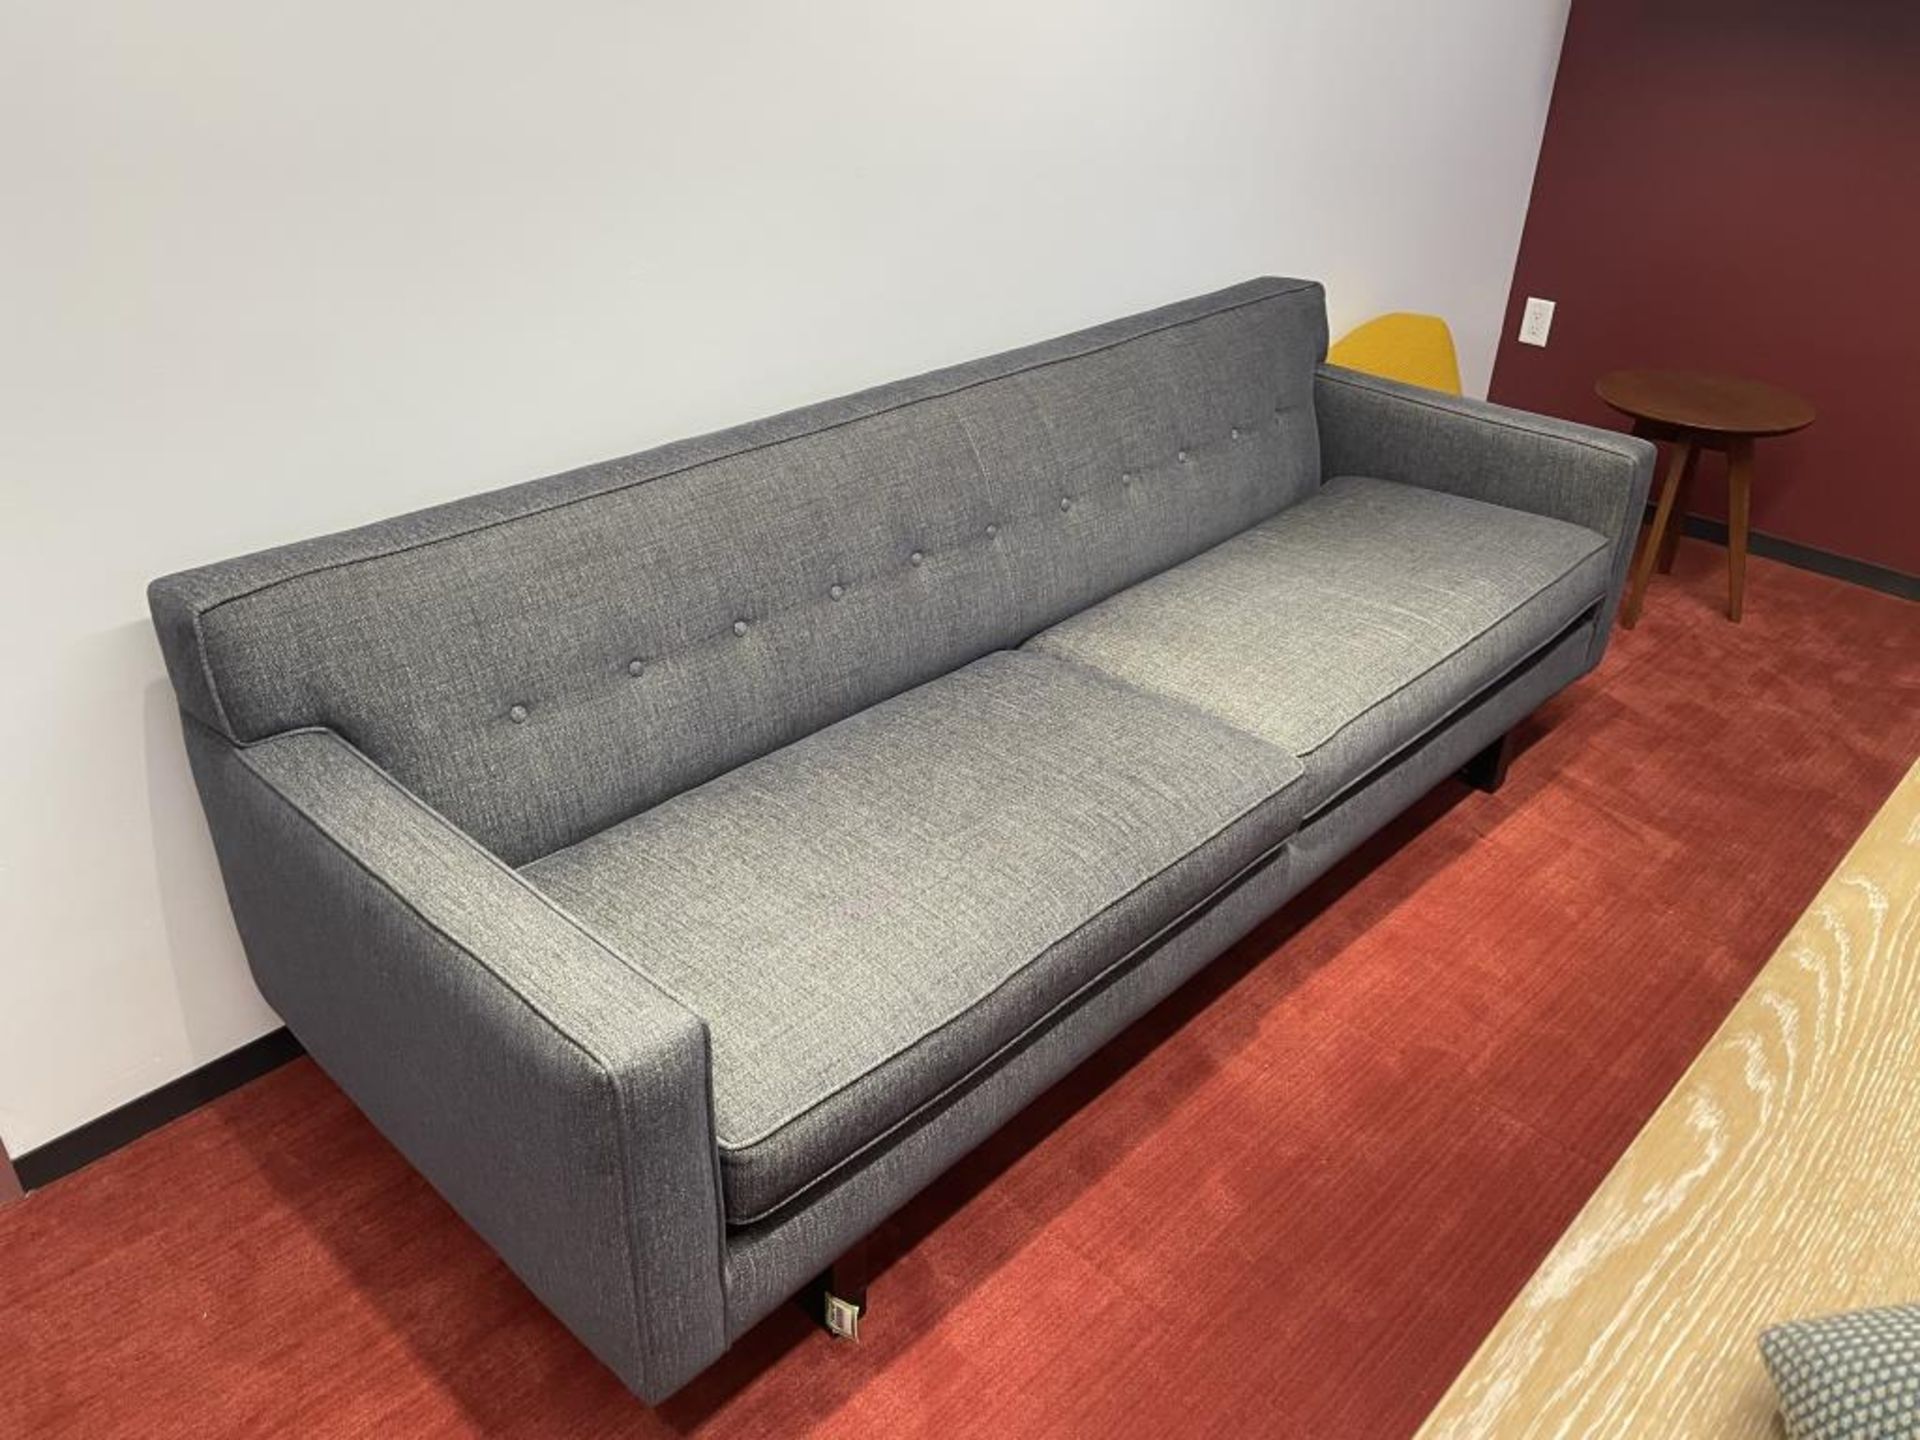 Room & Board Andre Sofa, Charcoal 89"L - Image 3 of 4